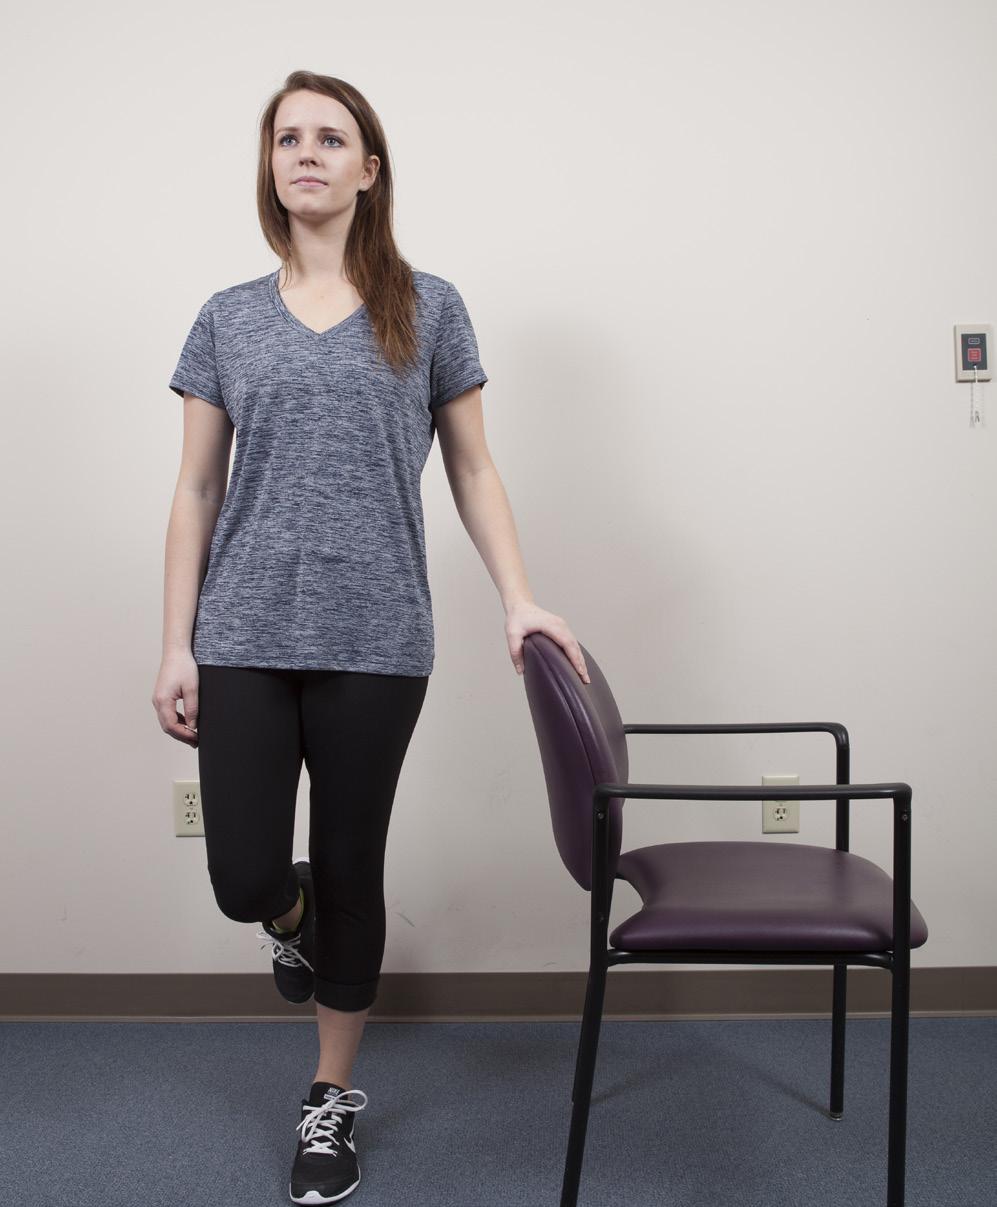 Balance at the chair: Practice balancing on one leg. Stand straight and tall. Support yourself by holding onto the backs of 2 steady chairs or a counter. Do not bend at your waist or knees.